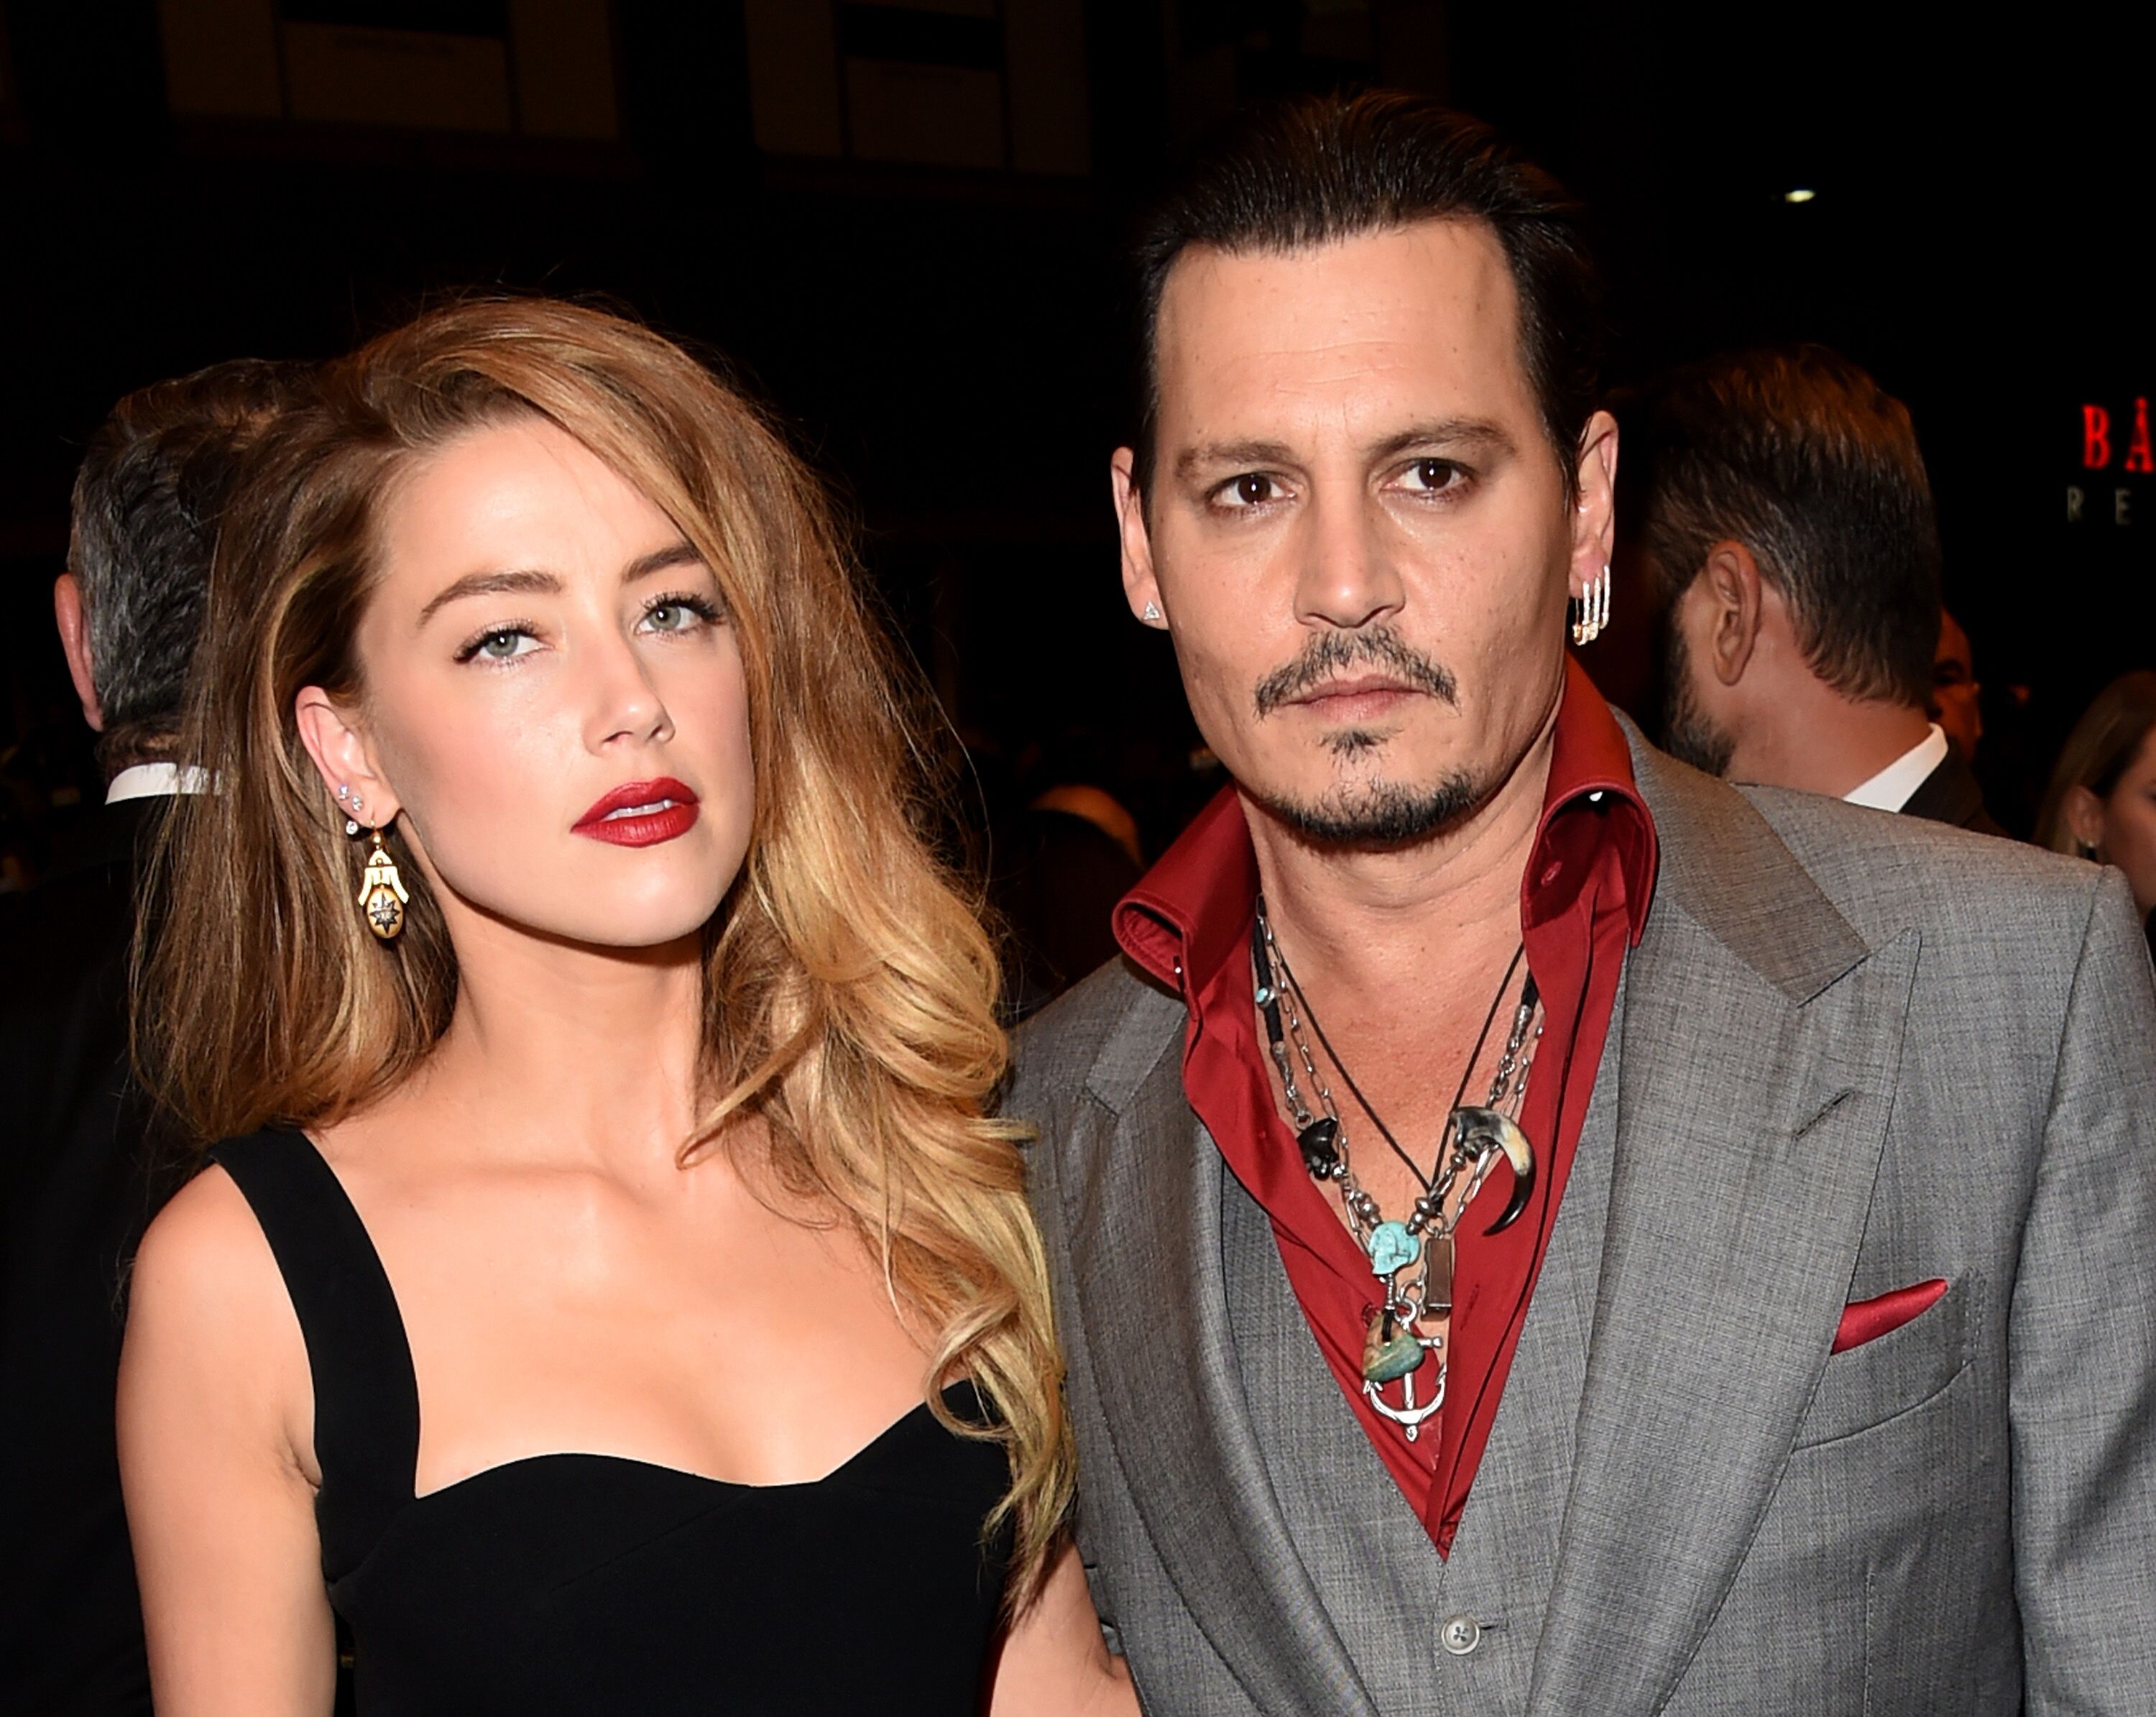 Amber Heard and Johnny Depp attend the "Black Mass" premiere during the 2015 Toronto International Film Festival. | Source: Getty Images